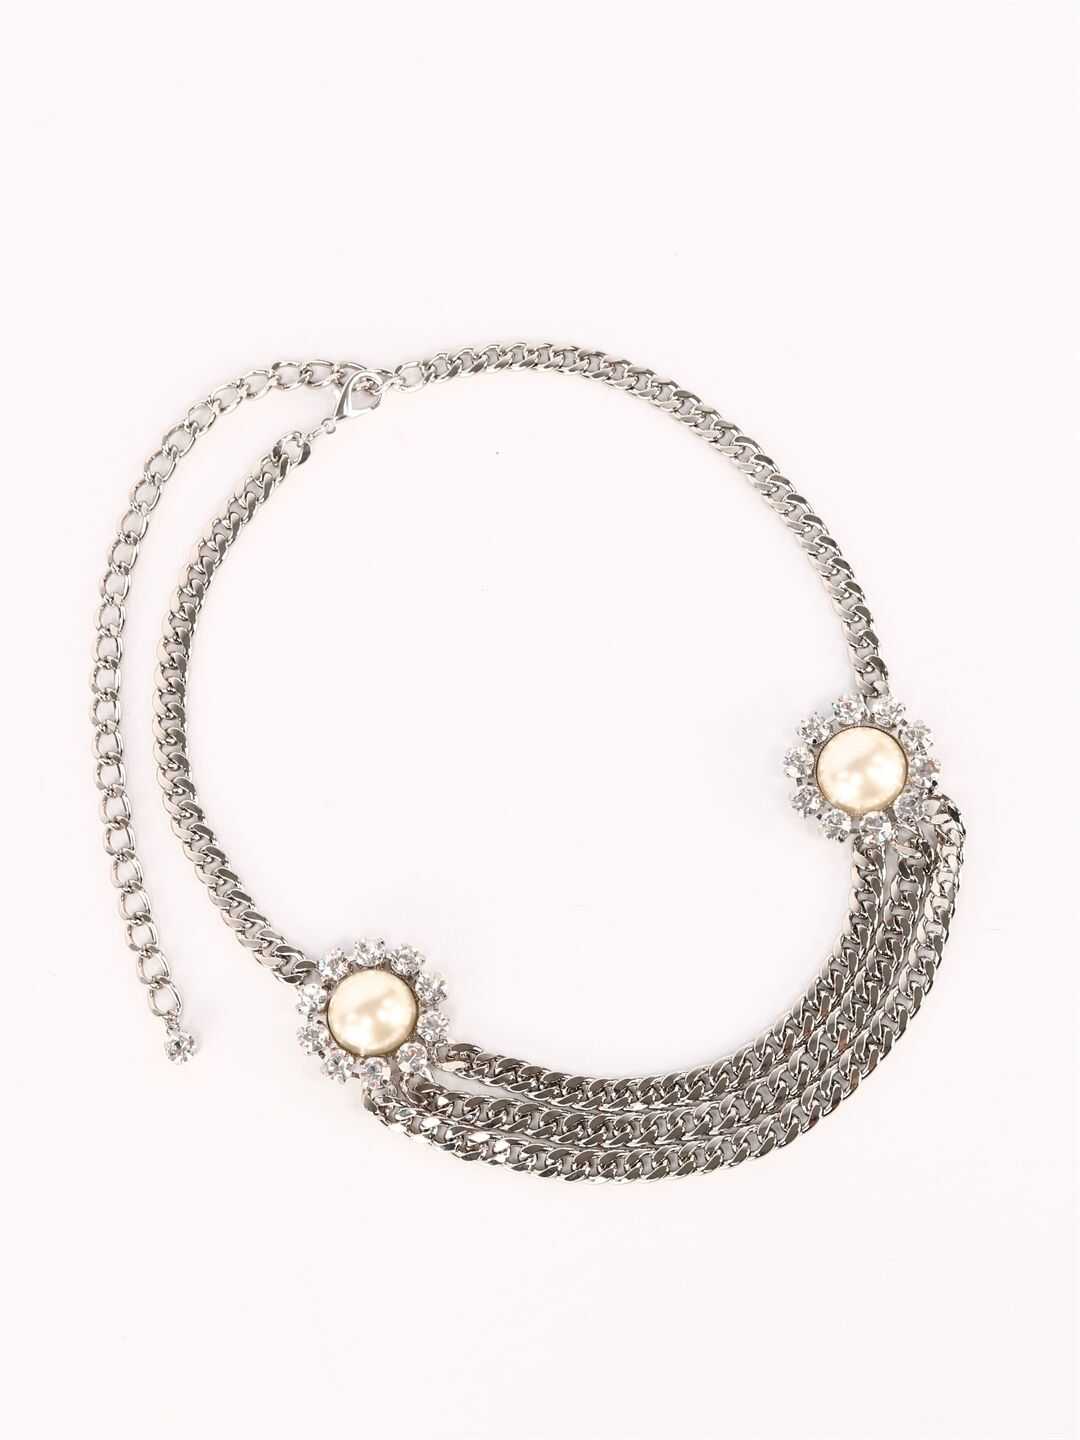 Alessandra Rich Crystal Chain Belt With Pearl And Crystal Elements FABA2326 Silver